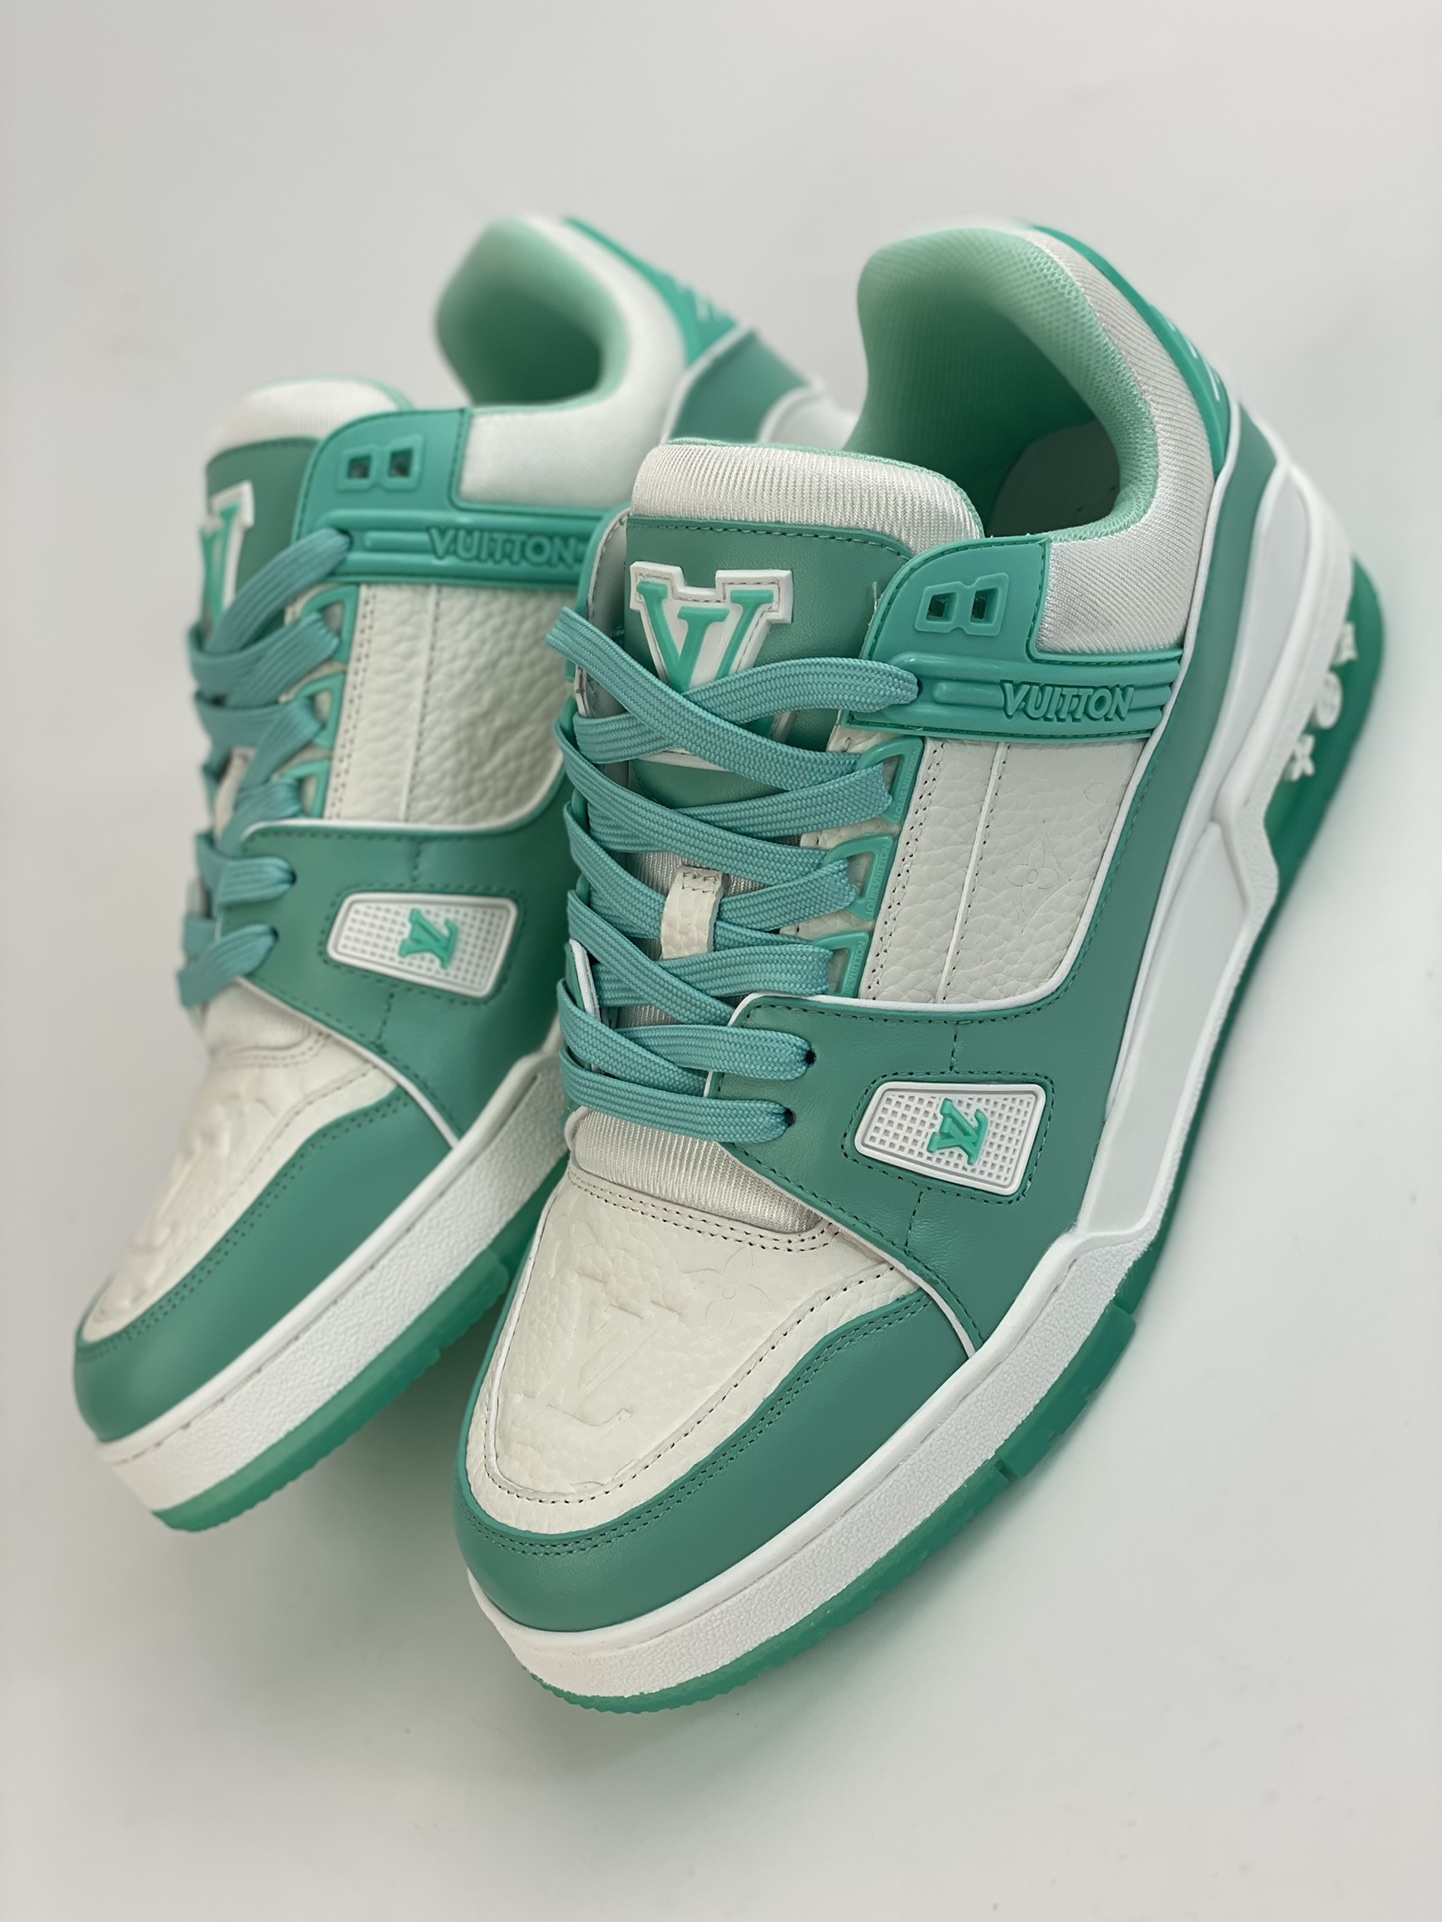 2021s LV Trainer limited edition latest color matching is limited to domestic sales